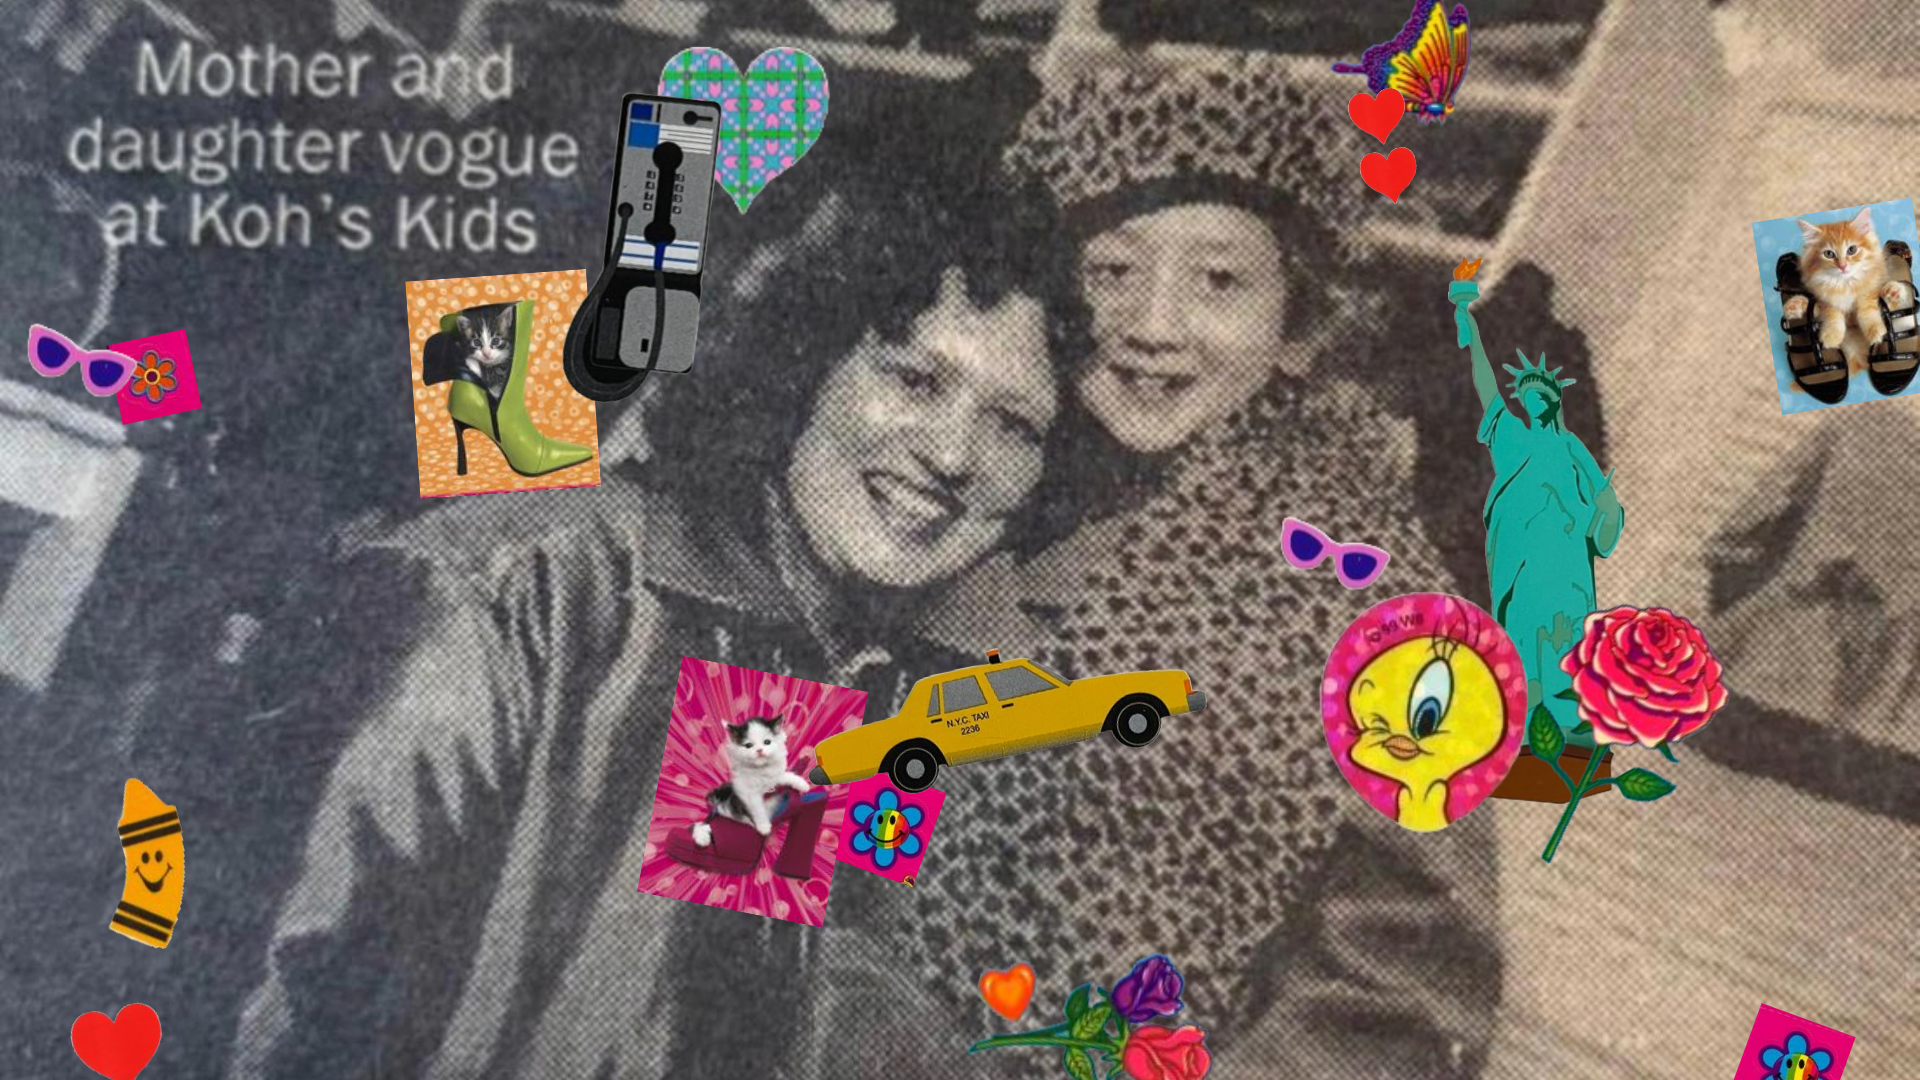 newspaper cutout showing a mother and daughter partially covered in stickers